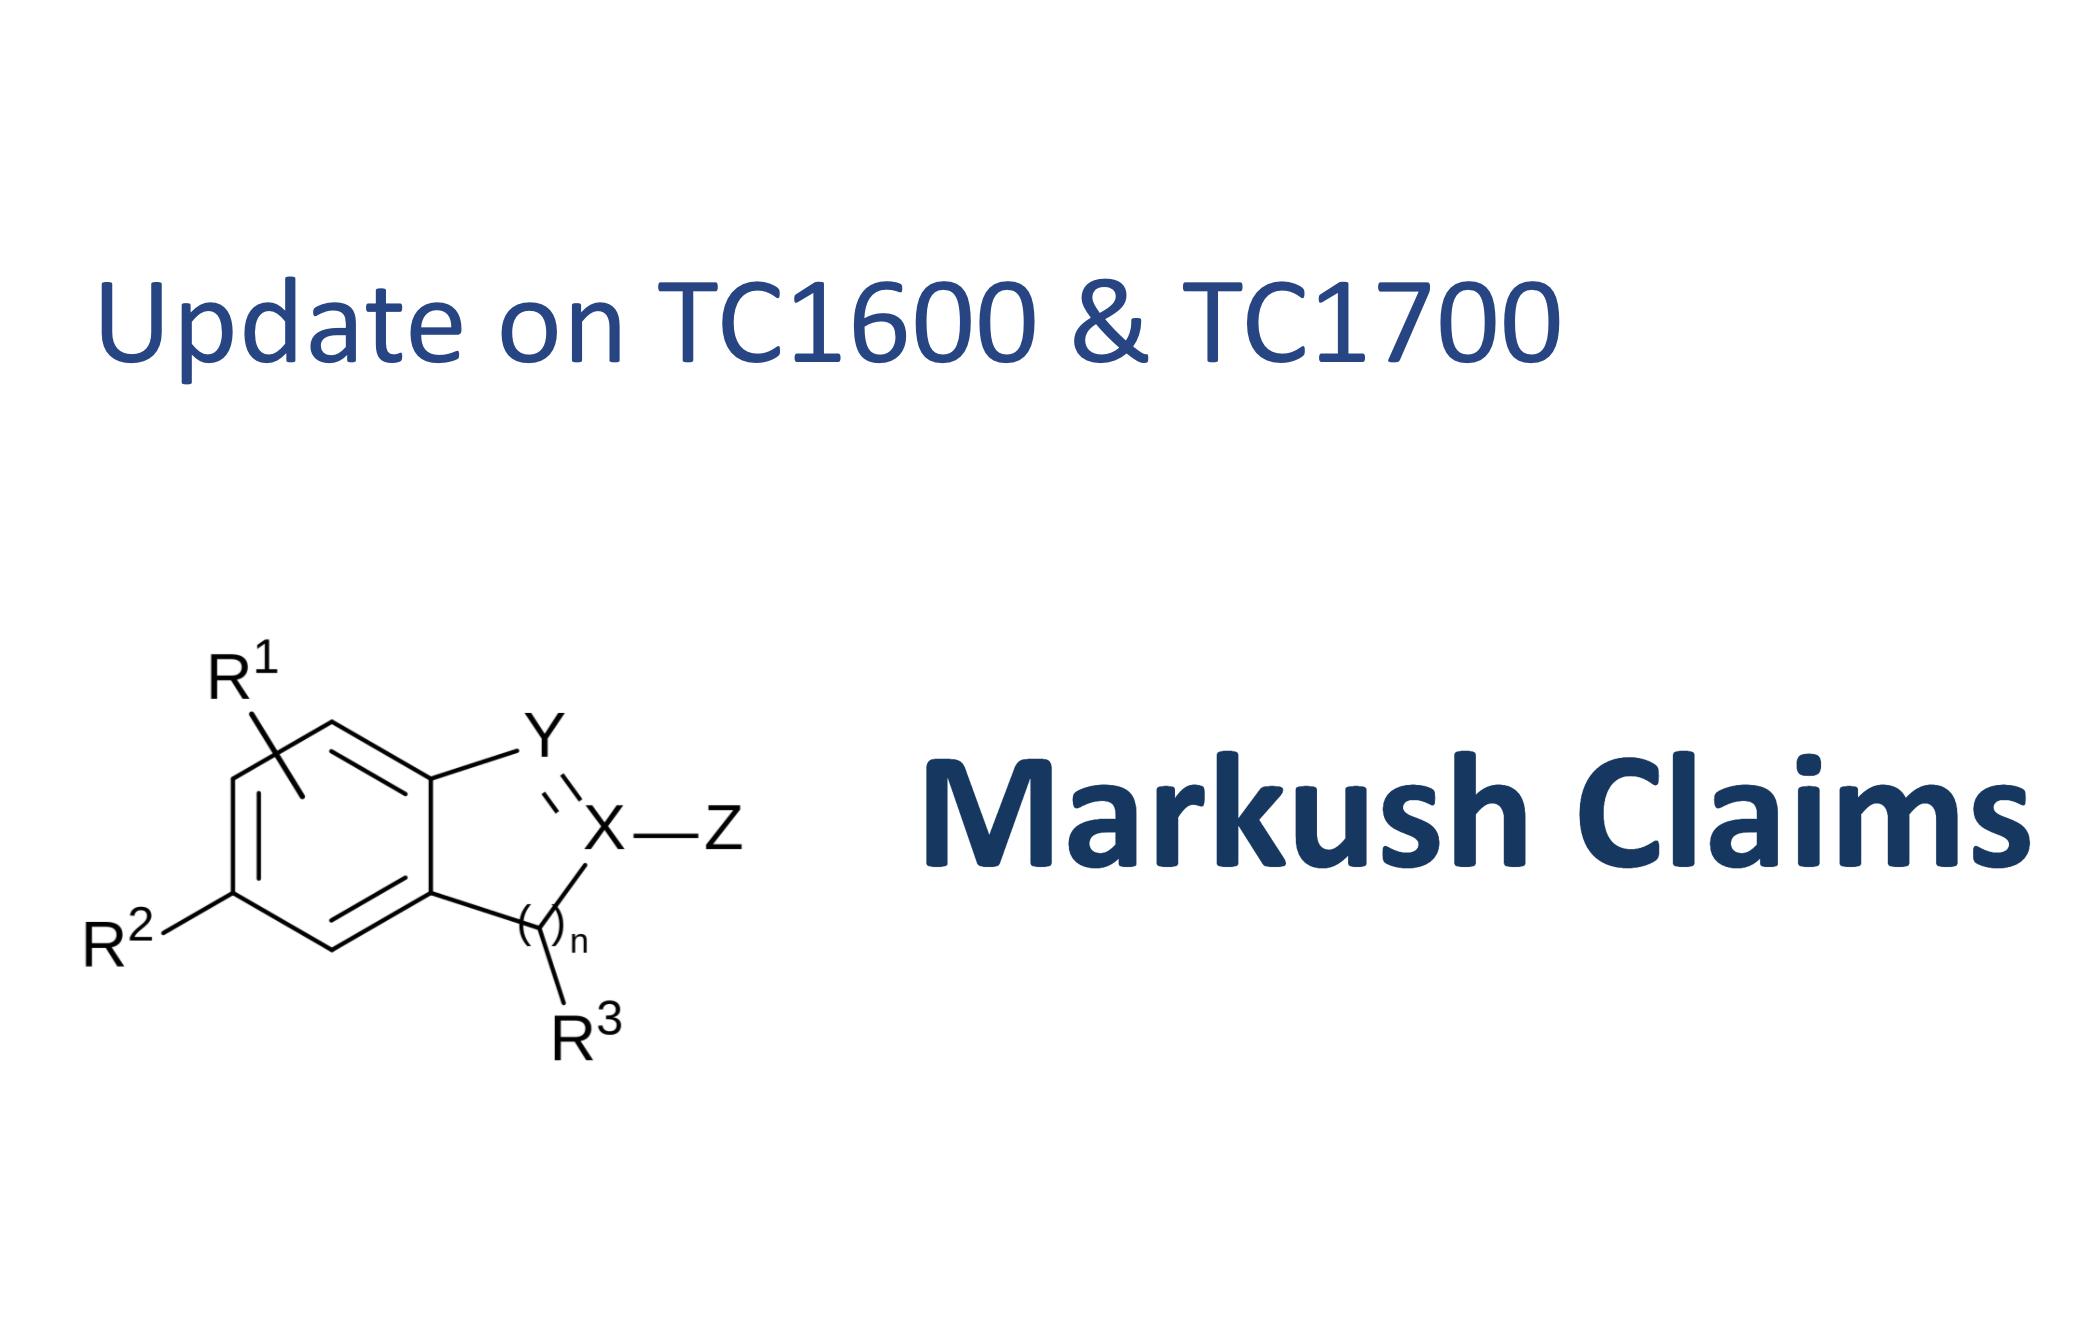 Cover Image for Update on TC1600 and TC1700’s Treatment of Markush Claims